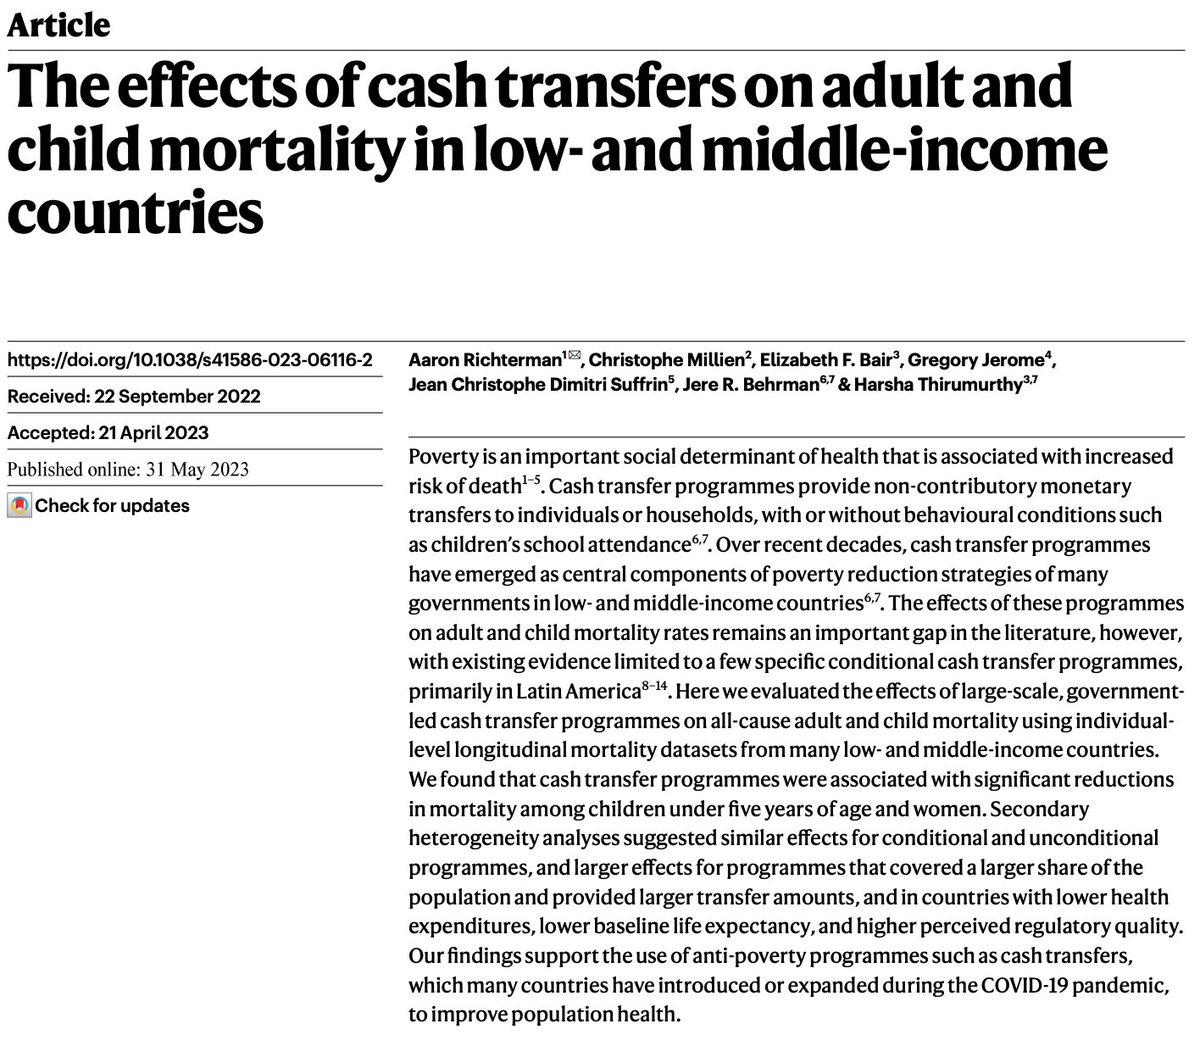 Over 100 governments in low- and middle-income countries have introduced anti-poverty cash transfer programs over the last 3 decades In new research, we examined the effects of these initiatives on the ultimate health outcome — mortality Published today in @Nature /1